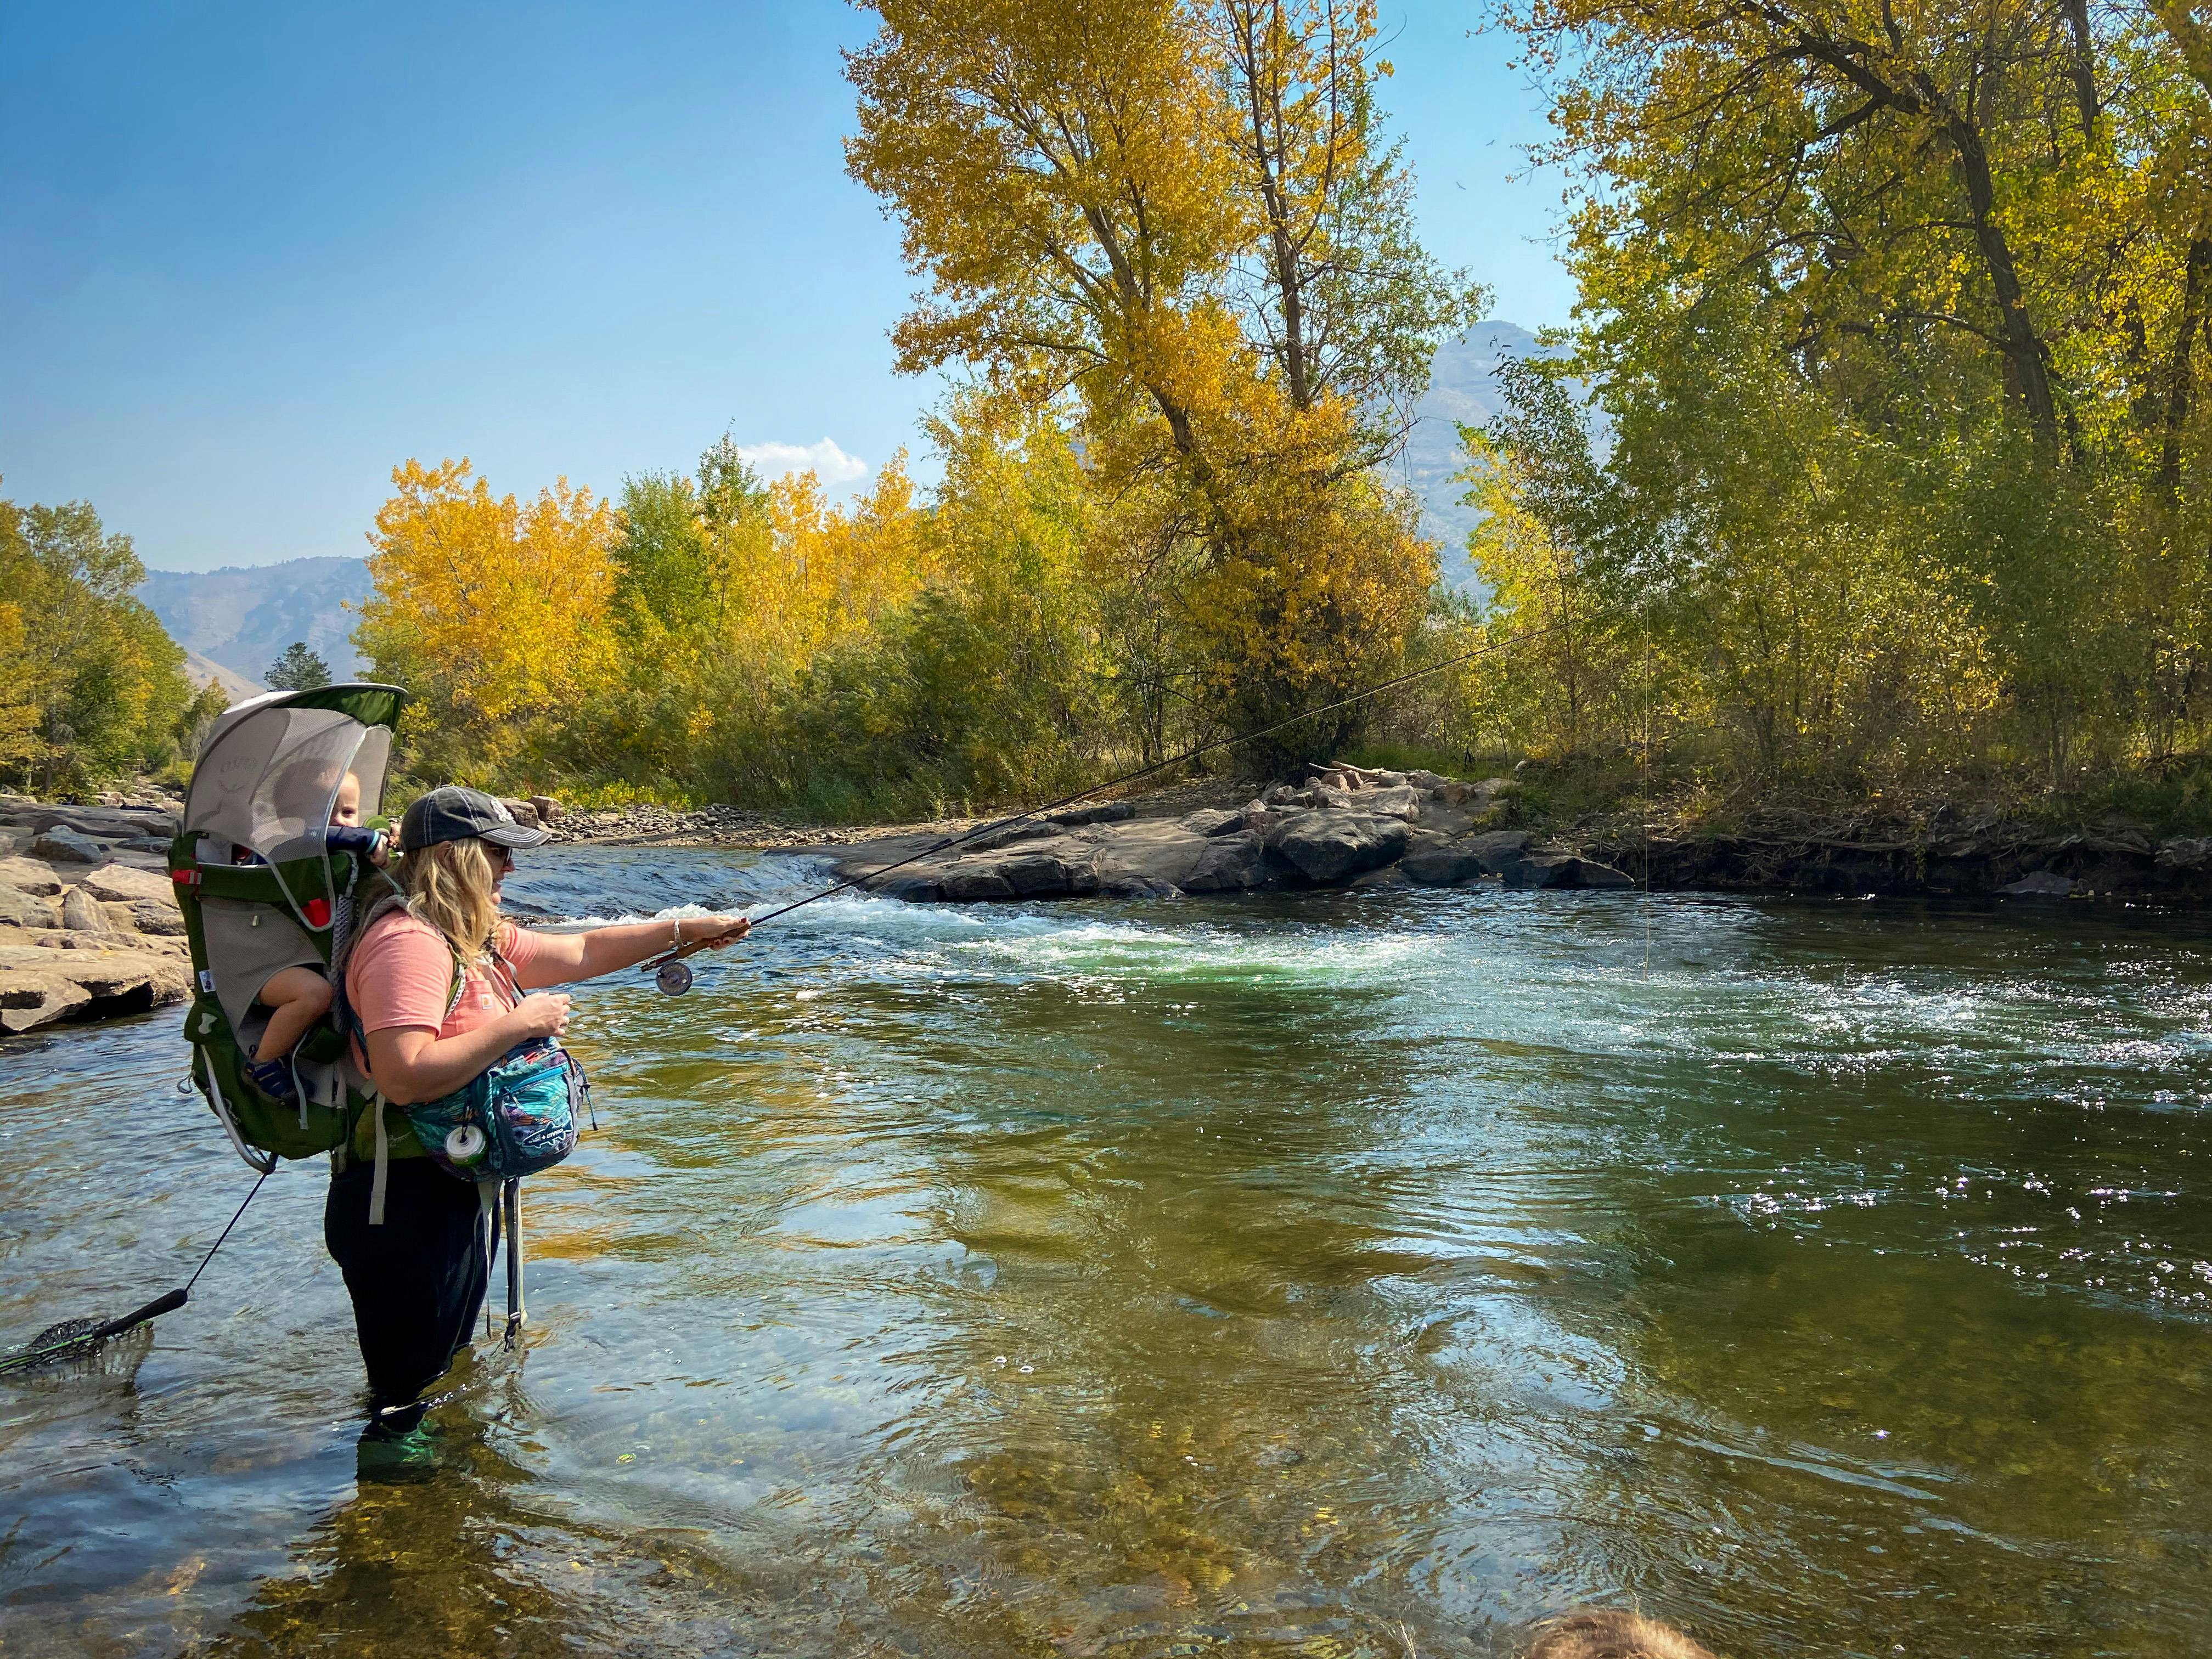 The author stands in a river and fly fishes with her son on her back in a baby carrier. The sky is bright blue and the trees in the background are a blend of green and yellow.